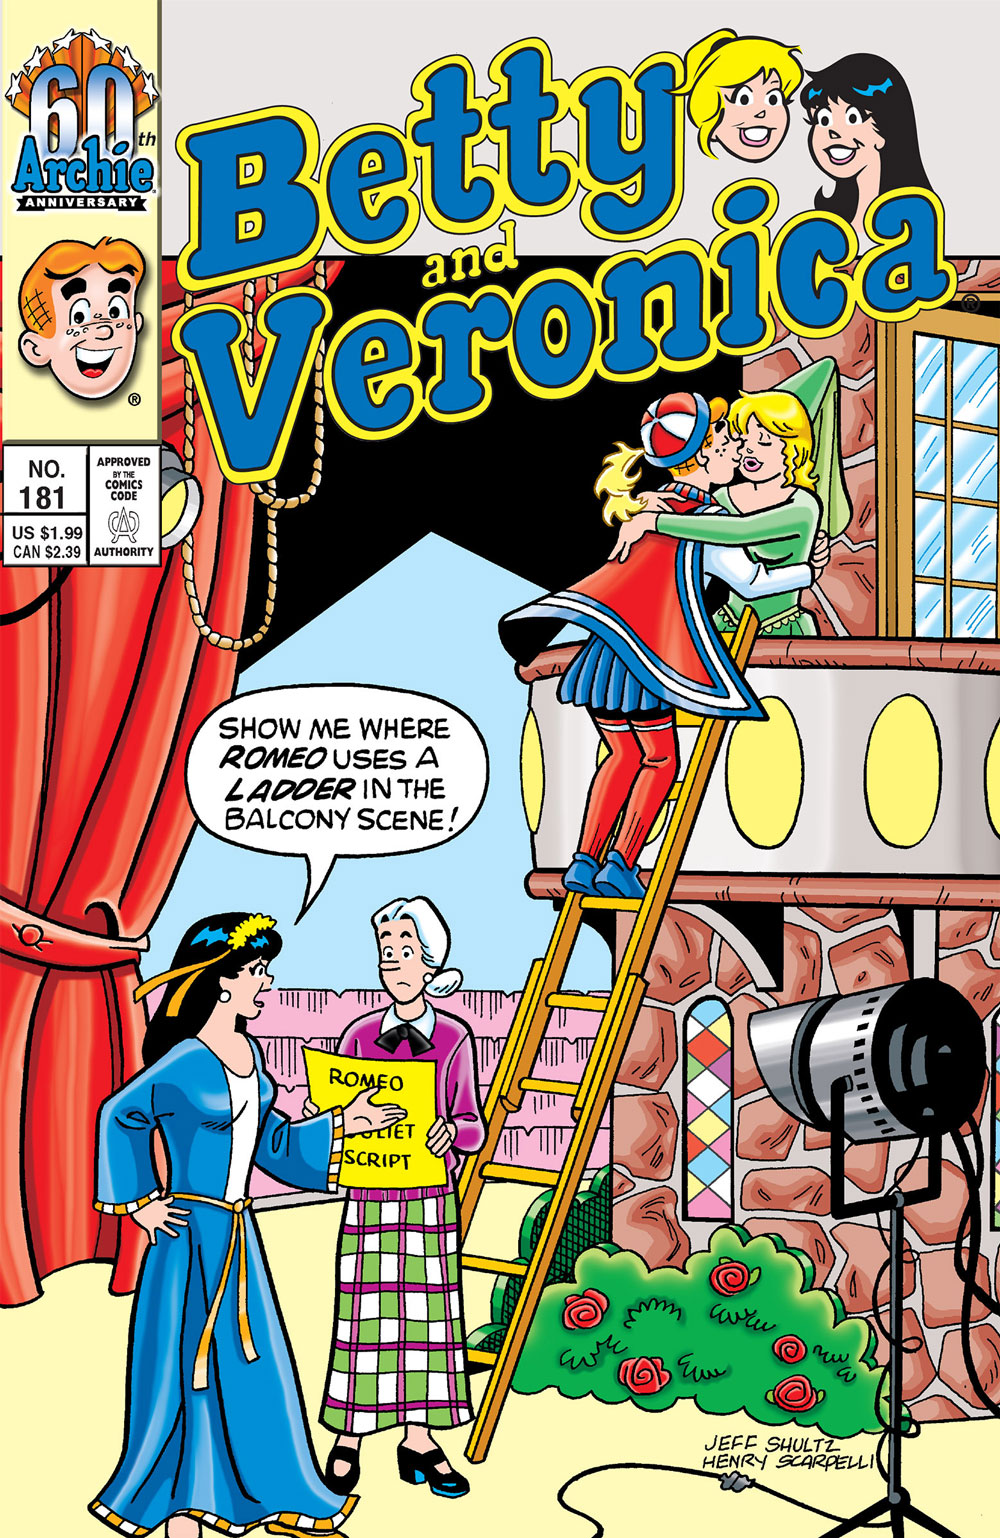 During a staging of the Shakespeare play Romeo and Juliet, Archie plays Romeo, and he has climbed up a ladder to kiss Betty, who is playing Juliet. Veronica is on the stage looking angry. She says to Mrs. Grundy, who is holding the script, that the script doesn't call for Romeo to use a ladder in the balcony scene.